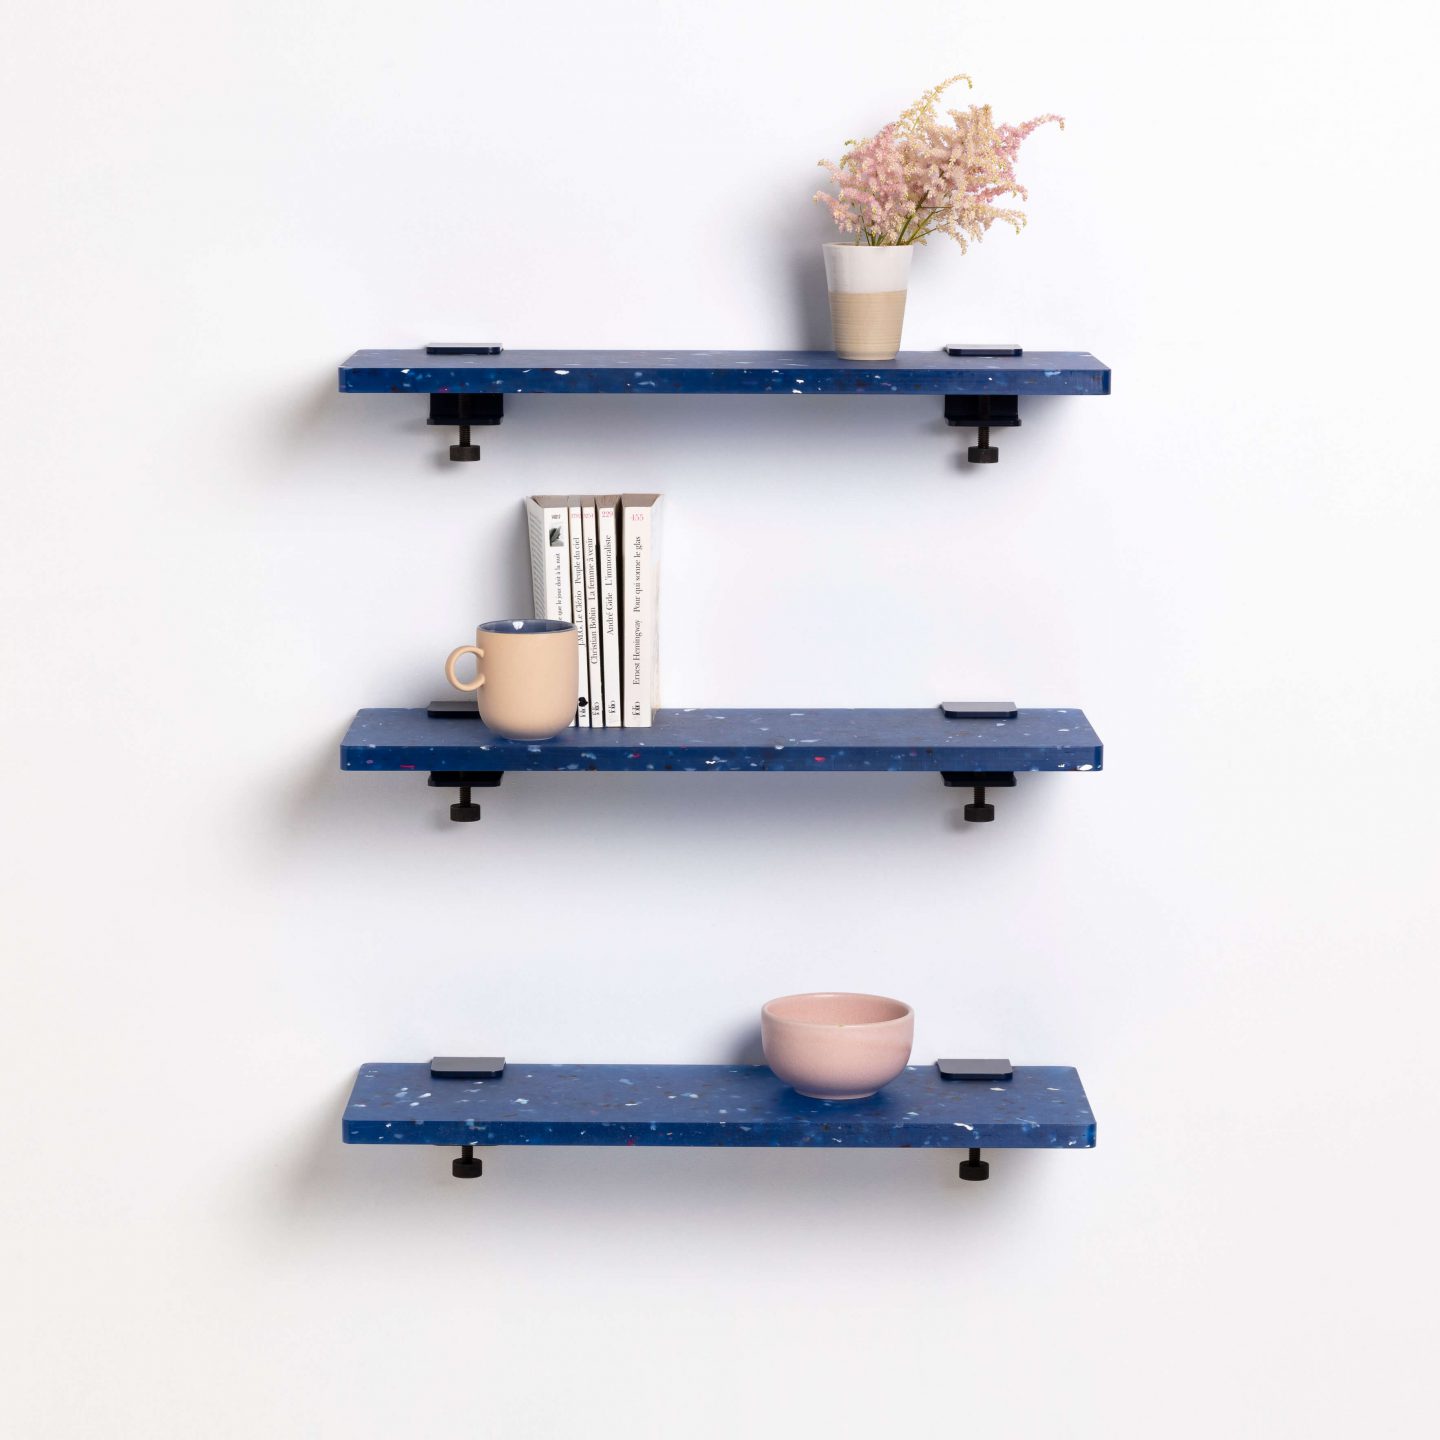 Set of 3 Pacifico blue recycled plastic wall shelves - 60 or 90cm